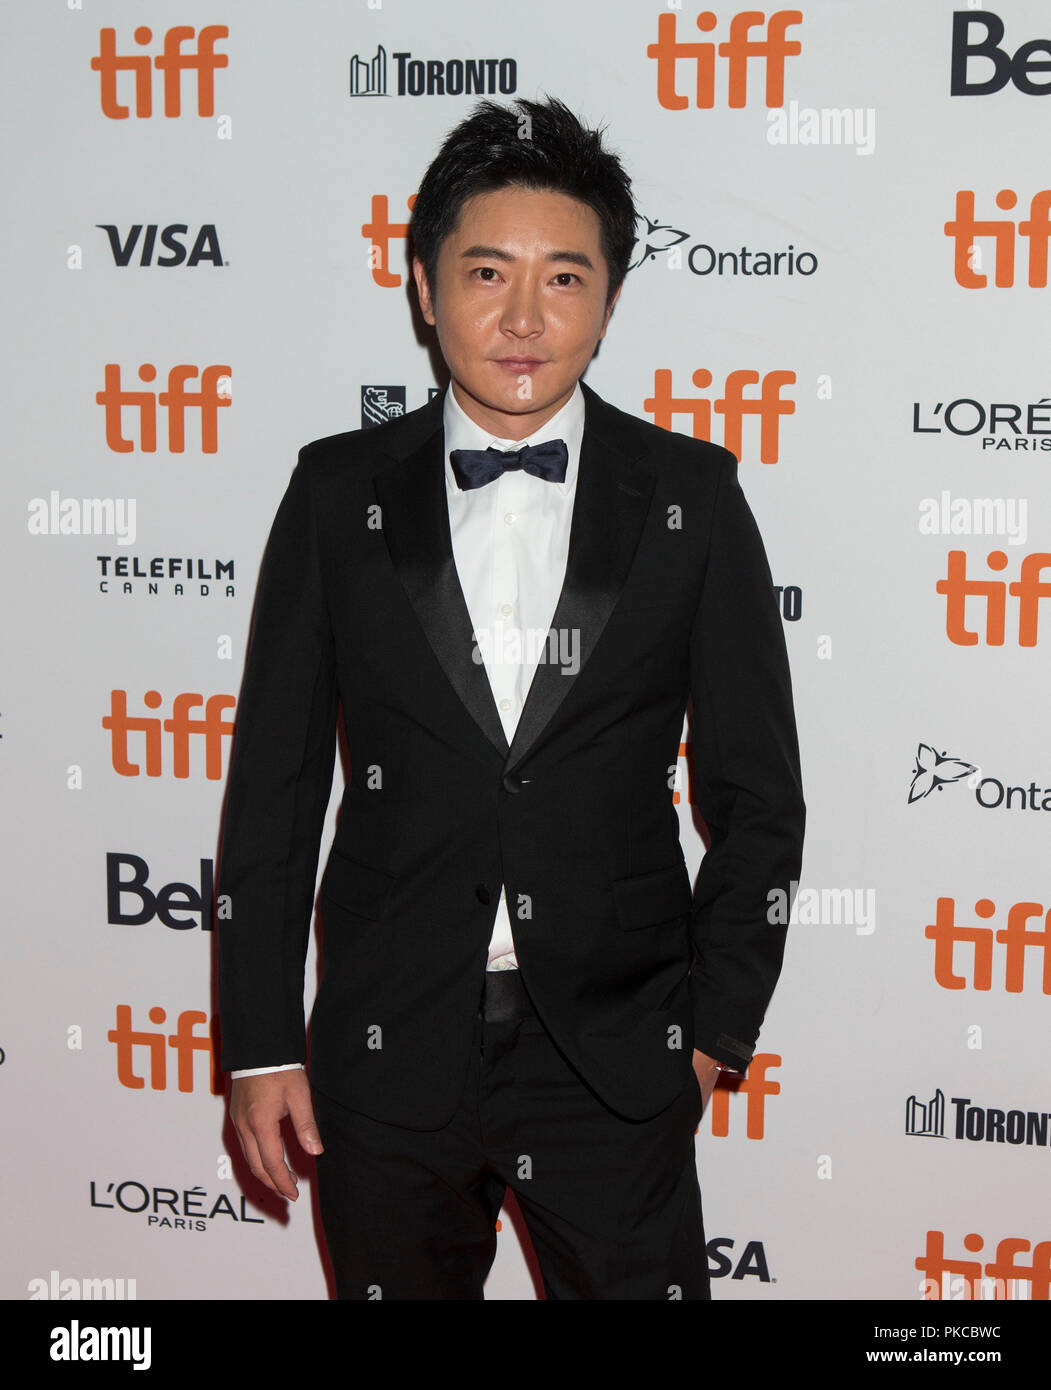 (180913) -- TORONTO, Sept. 13, 2018 (Xinhua) -- Actor Guo Jingfei poses for photos before the world premiere of the film 'Baby' at Ryerson Theatre during the 2018 Toronto International Film Festival in Toronto, Canada, Sept. 12, 2018. (Xinhua/Zou Zheng) (dtf) Stock Photo